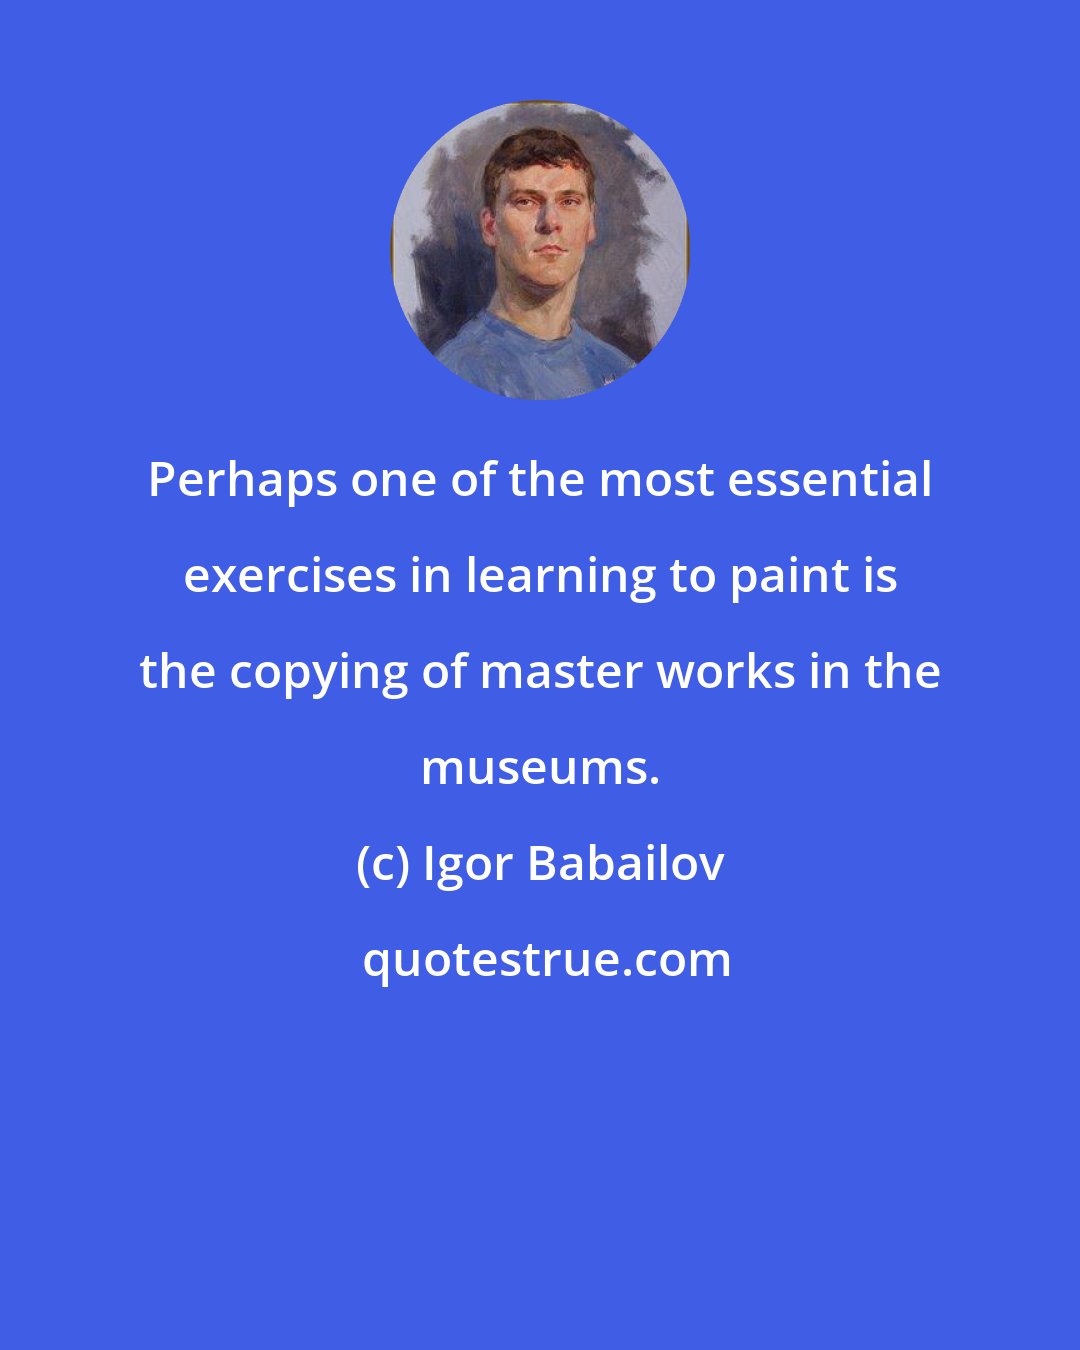 Igor Babailov: Perhaps one of the most essential exercises in learning to paint is the copying of master works in the museums.